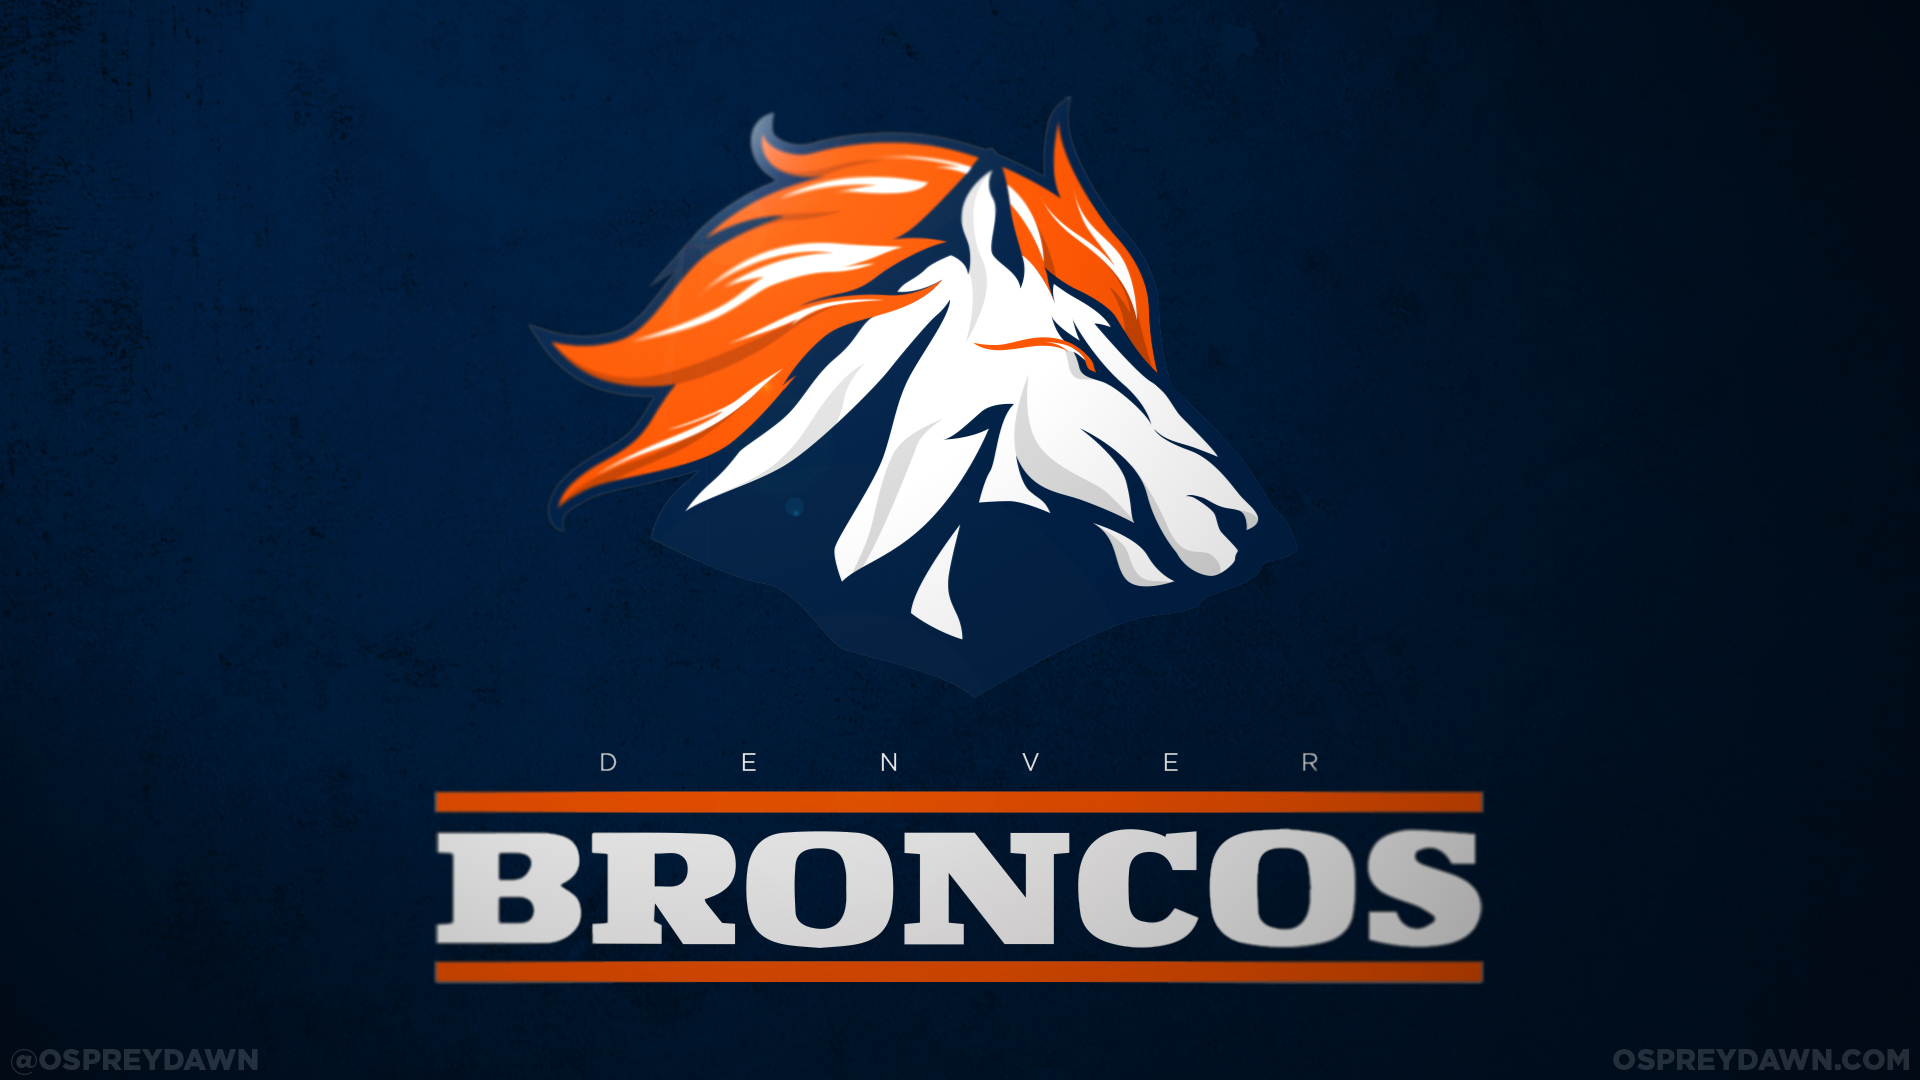 Denver Broncos Wallpapers Images Photos Pictures Backgrounds